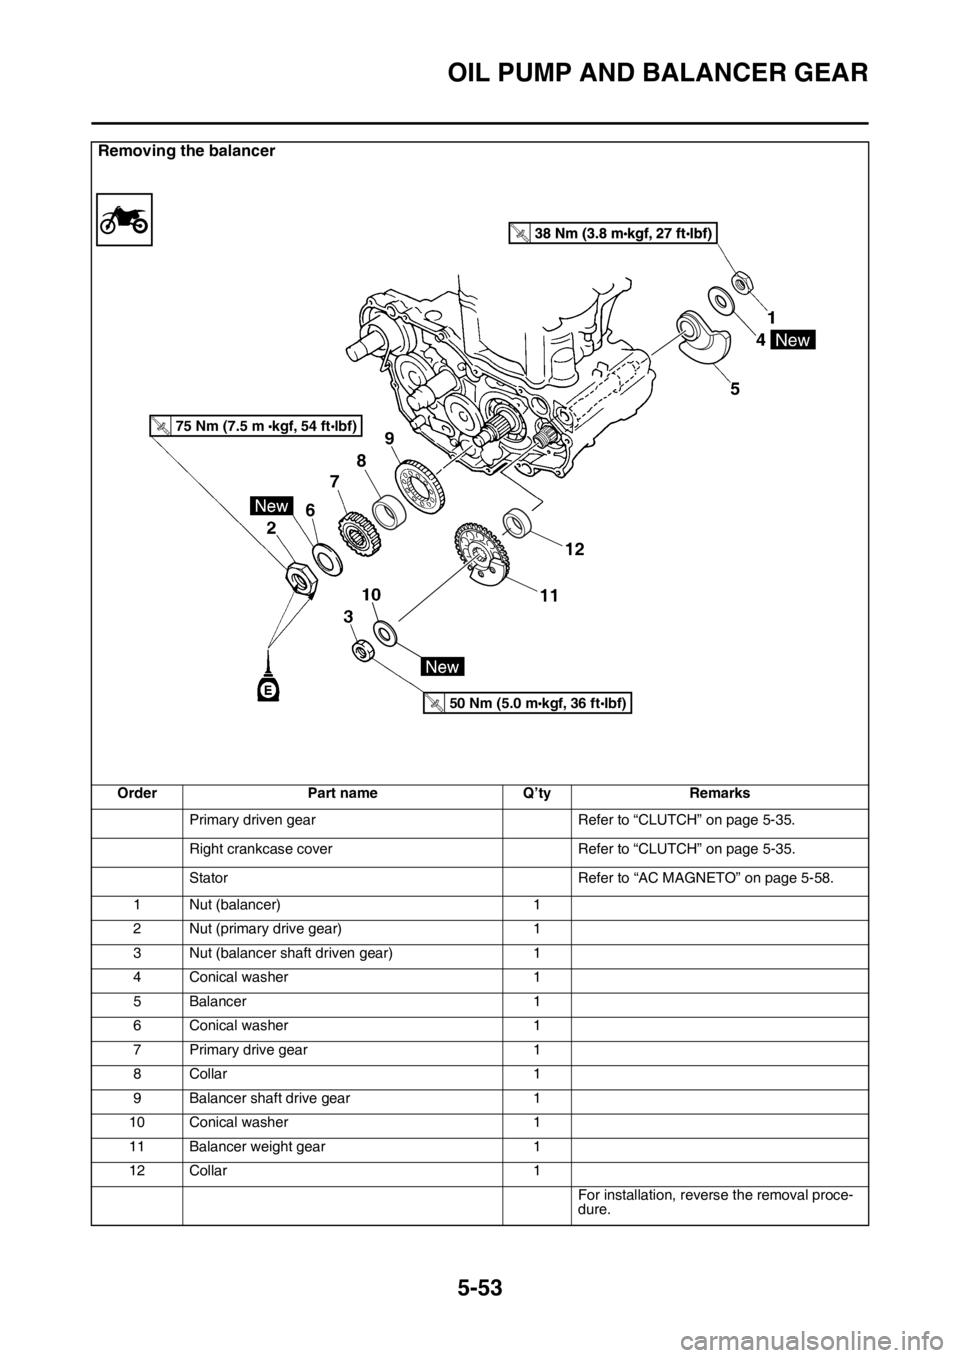 YAMAHA YZ250F 2015  Owners Manual OIL PUMP AND BALANCER GEAR
5-53
Removing the balancer
Order Part name Q’ty Remarks
Primary driven gear Refer to “CLUTCH” on page 5-35.
Right crankcase cover Refer to “CLUTCH” on page 5-35.
S